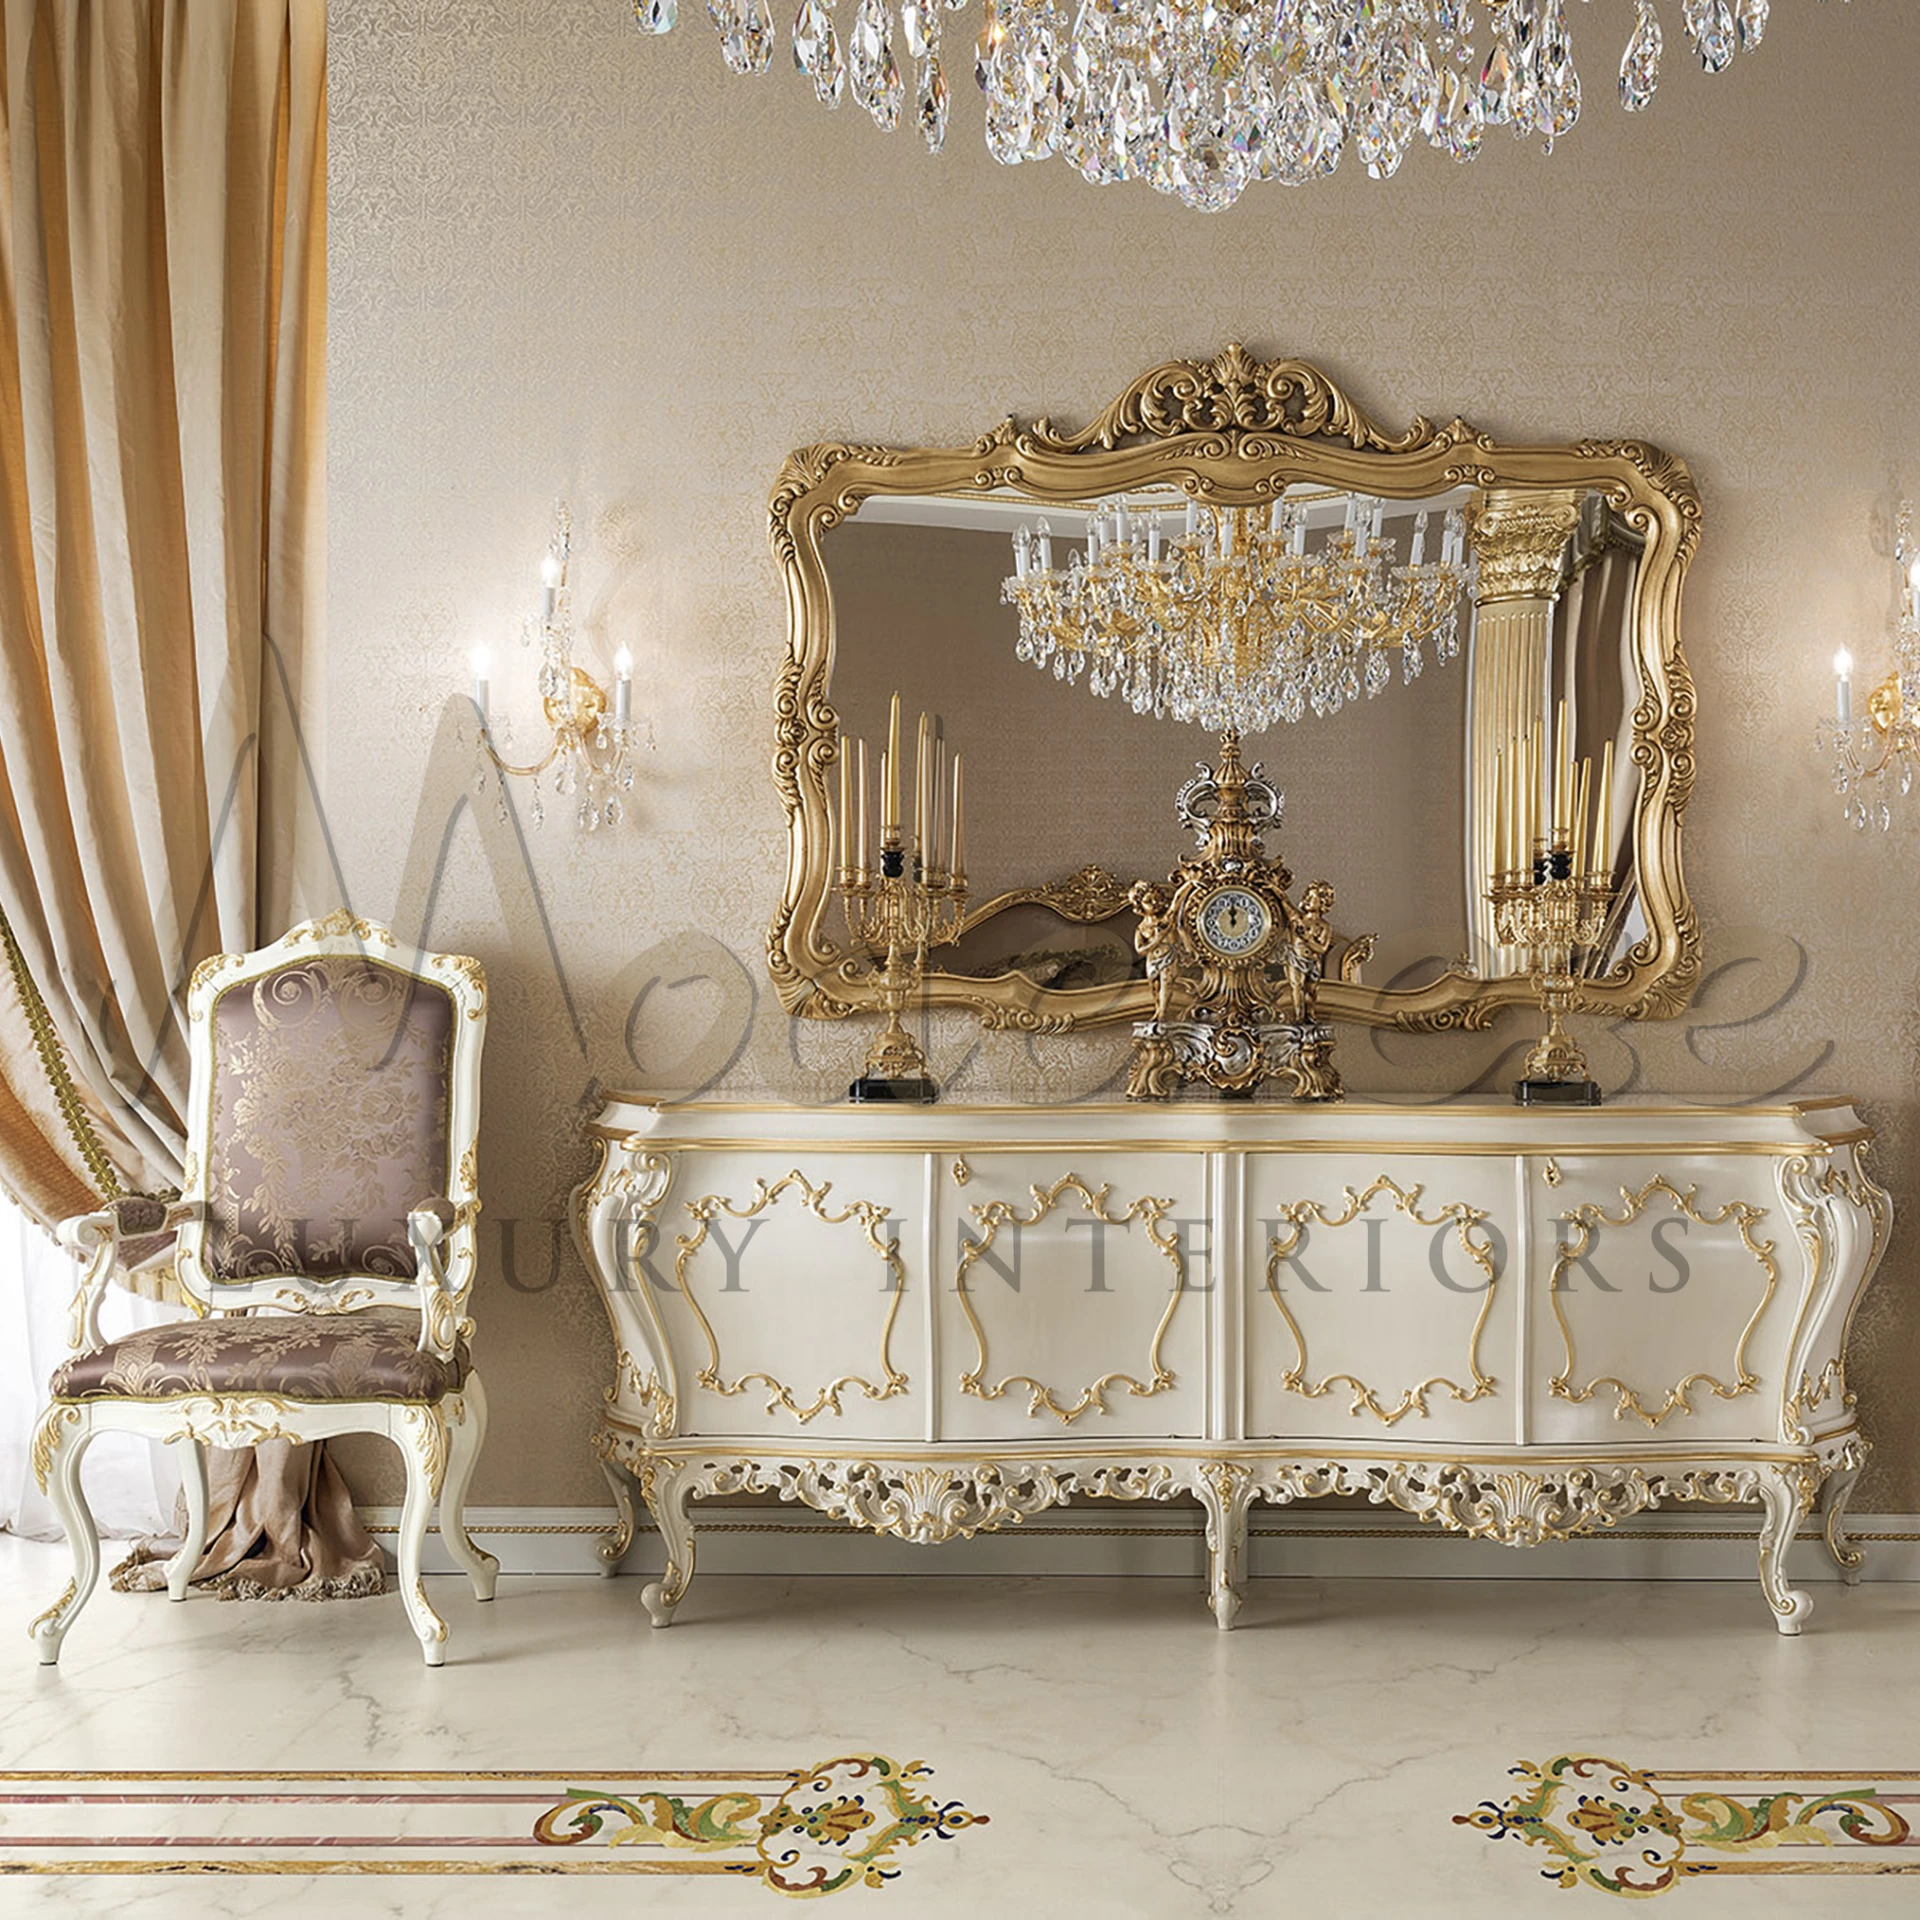 Experience with Modenese Furniture's interior. Baroque legs, light purple upholstery, and gold leaf applique details exude elegance and grandeur.